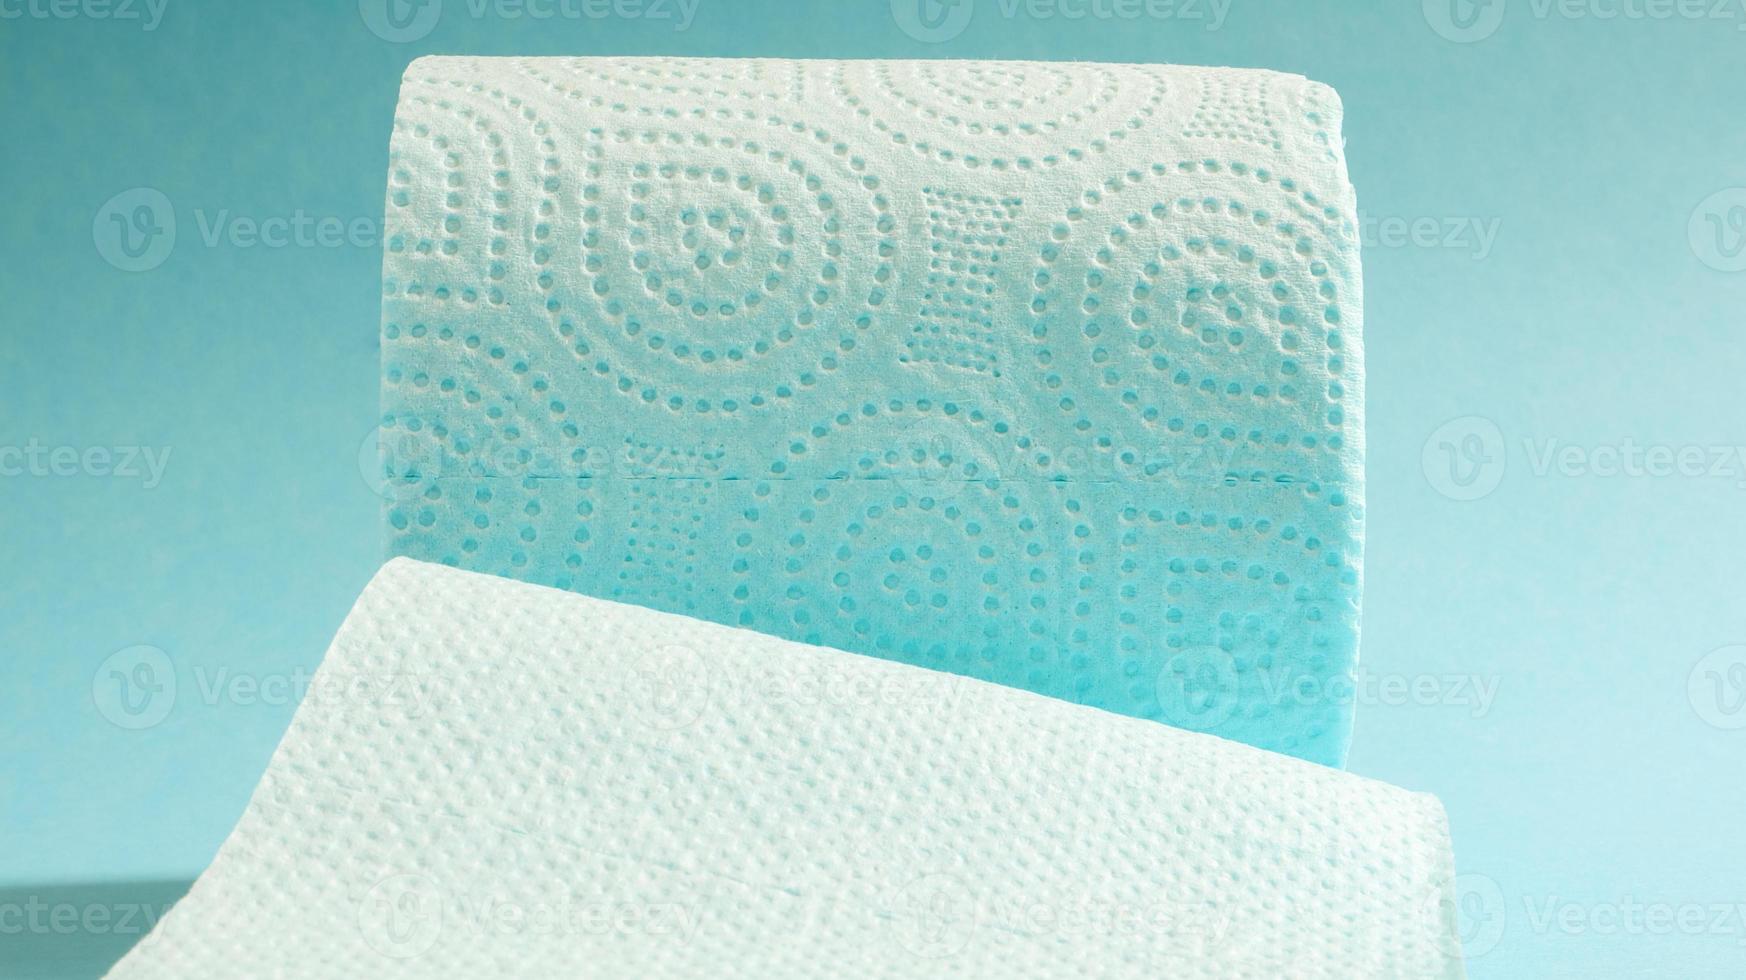 Blue roll of modern toilet paper on a blue background. A paper product on a cardboard sleeve, used for sanitary purposes from cellulose with cutouts for easy tearing. Embossed drawing photo